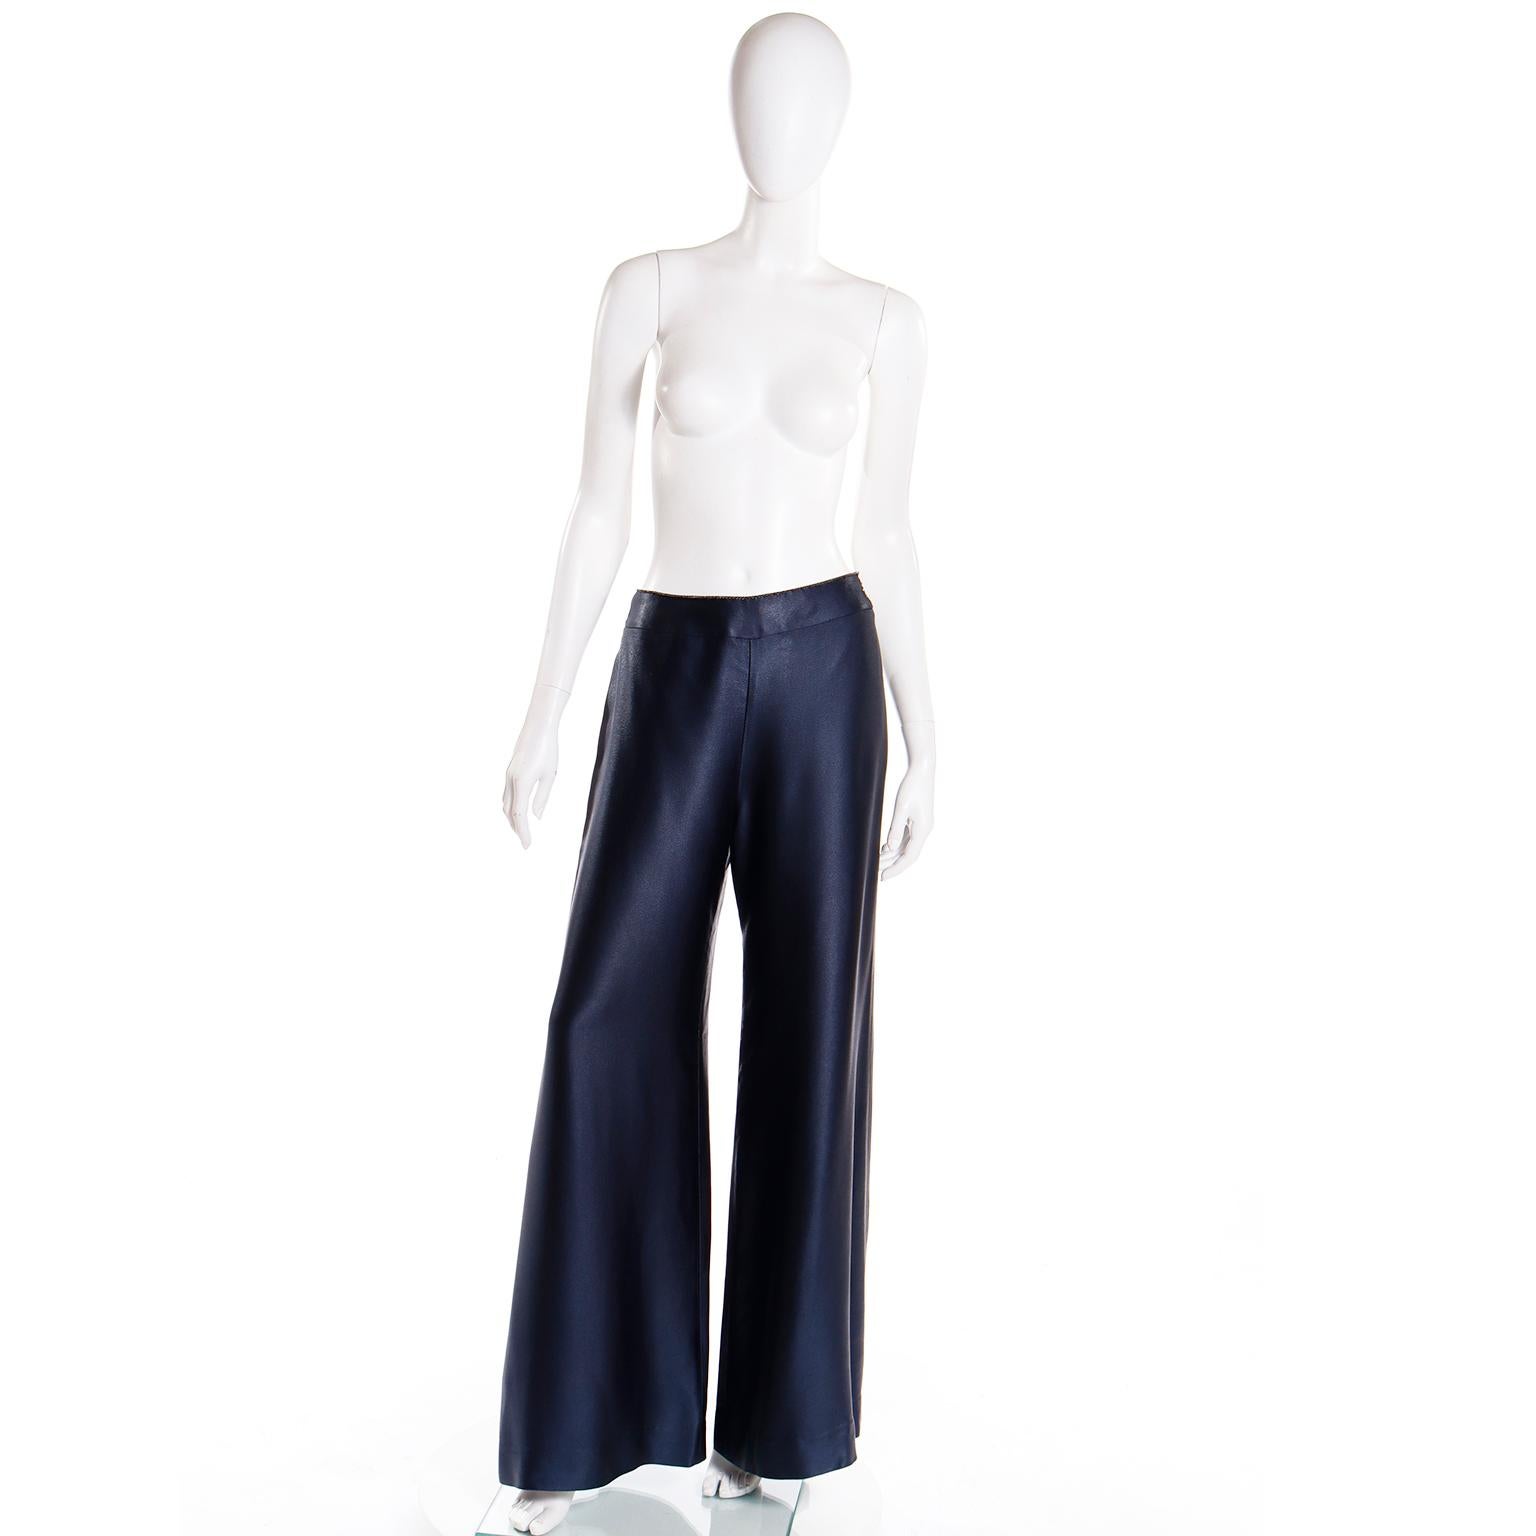 These luxe Fall 2000 Chanel vintage trousers are in a midnight blue rayon with a luxe satin finish. The pants have wide straight legs and are fully lined. There is a plastic CC stitched at the left hip and the pants close with a hidden zipper and